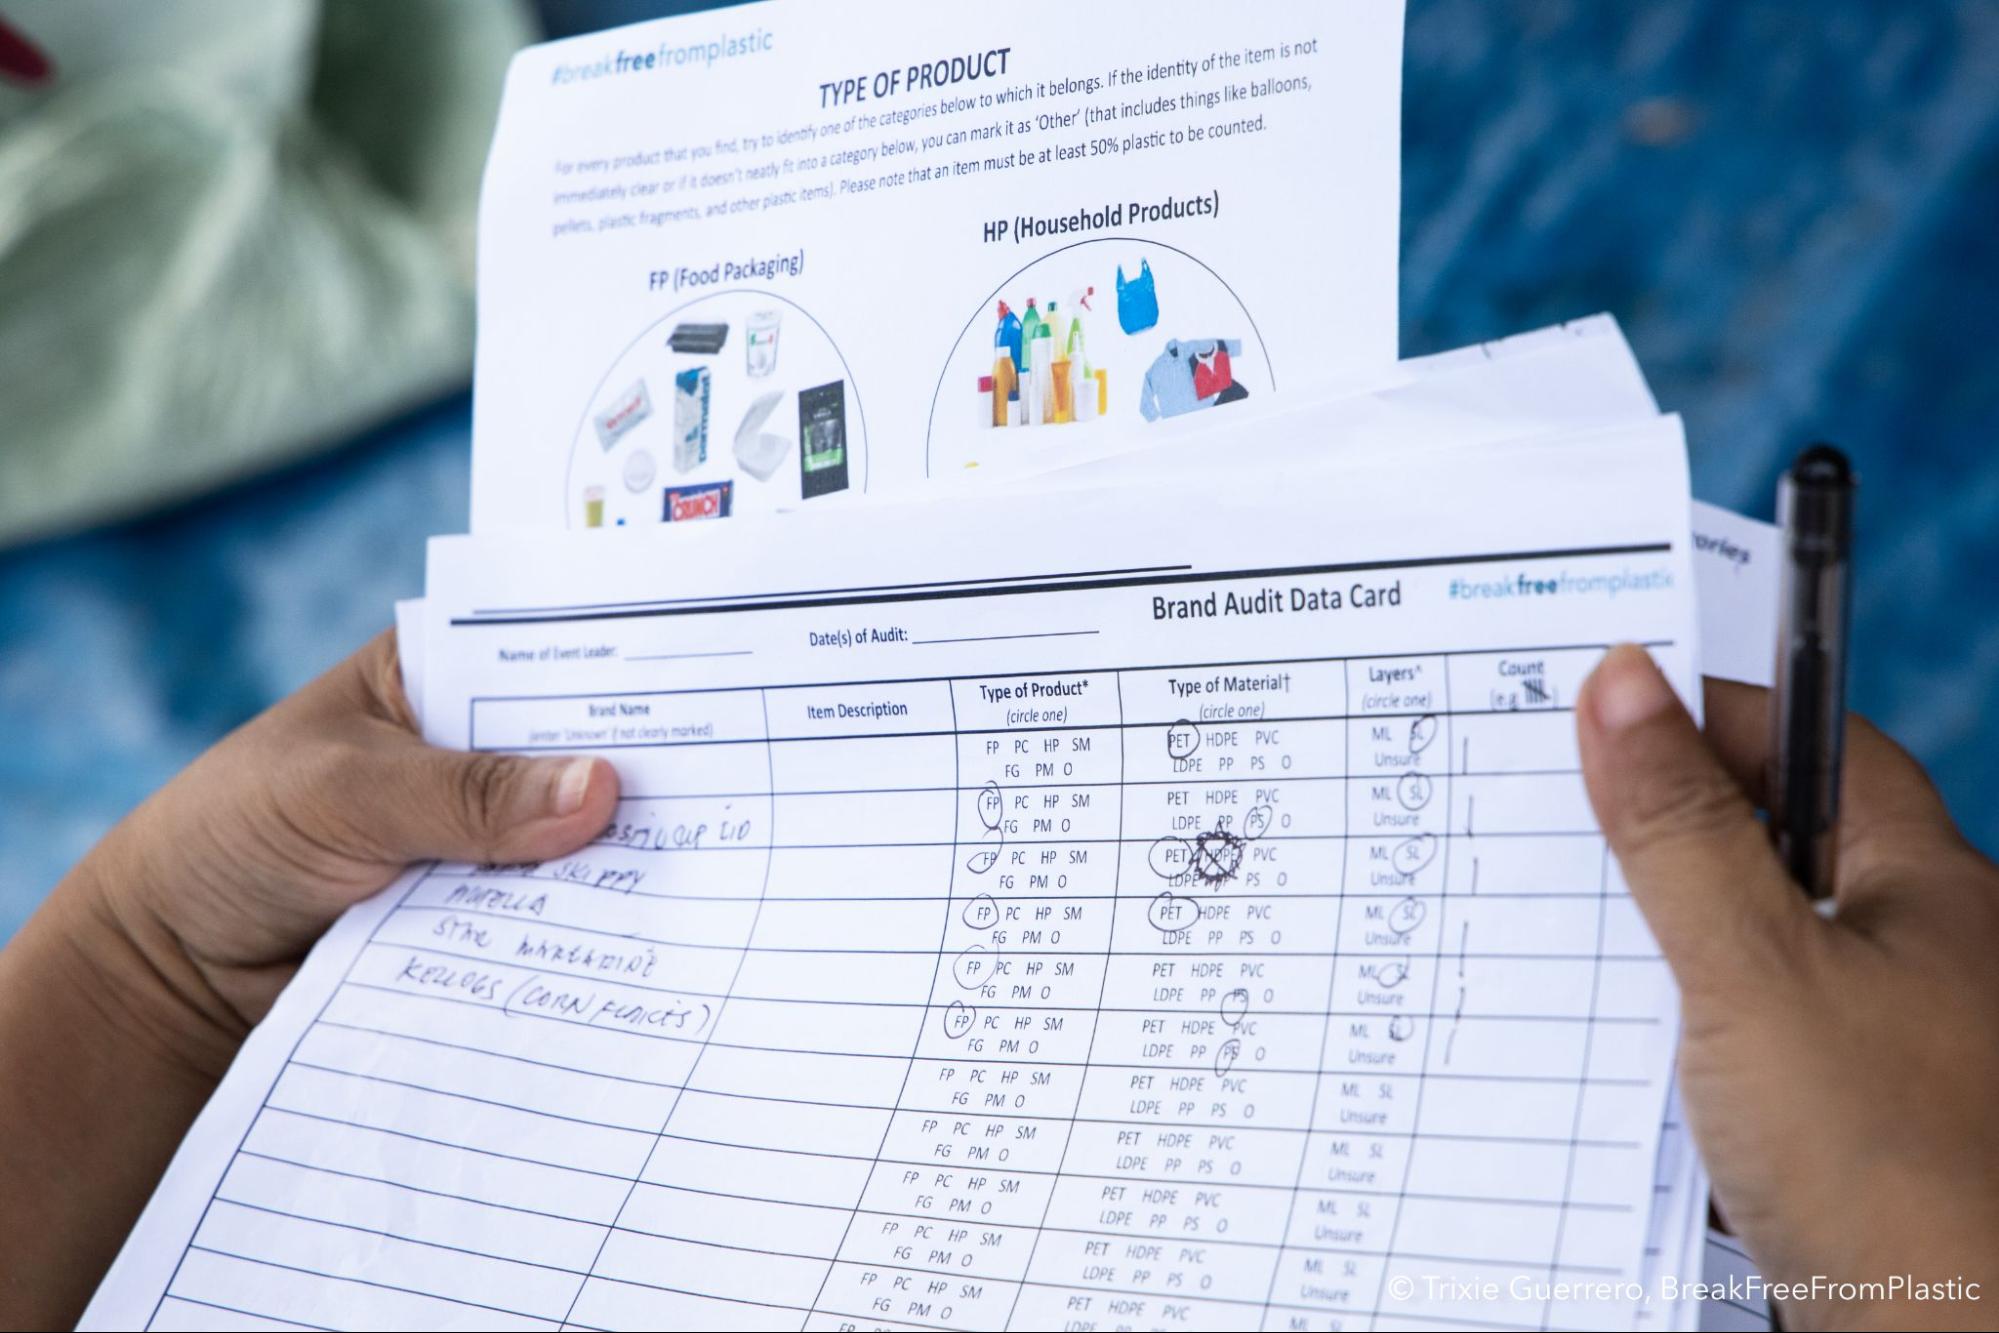 A photo of brand audit data forms at a recent event in the Philippines